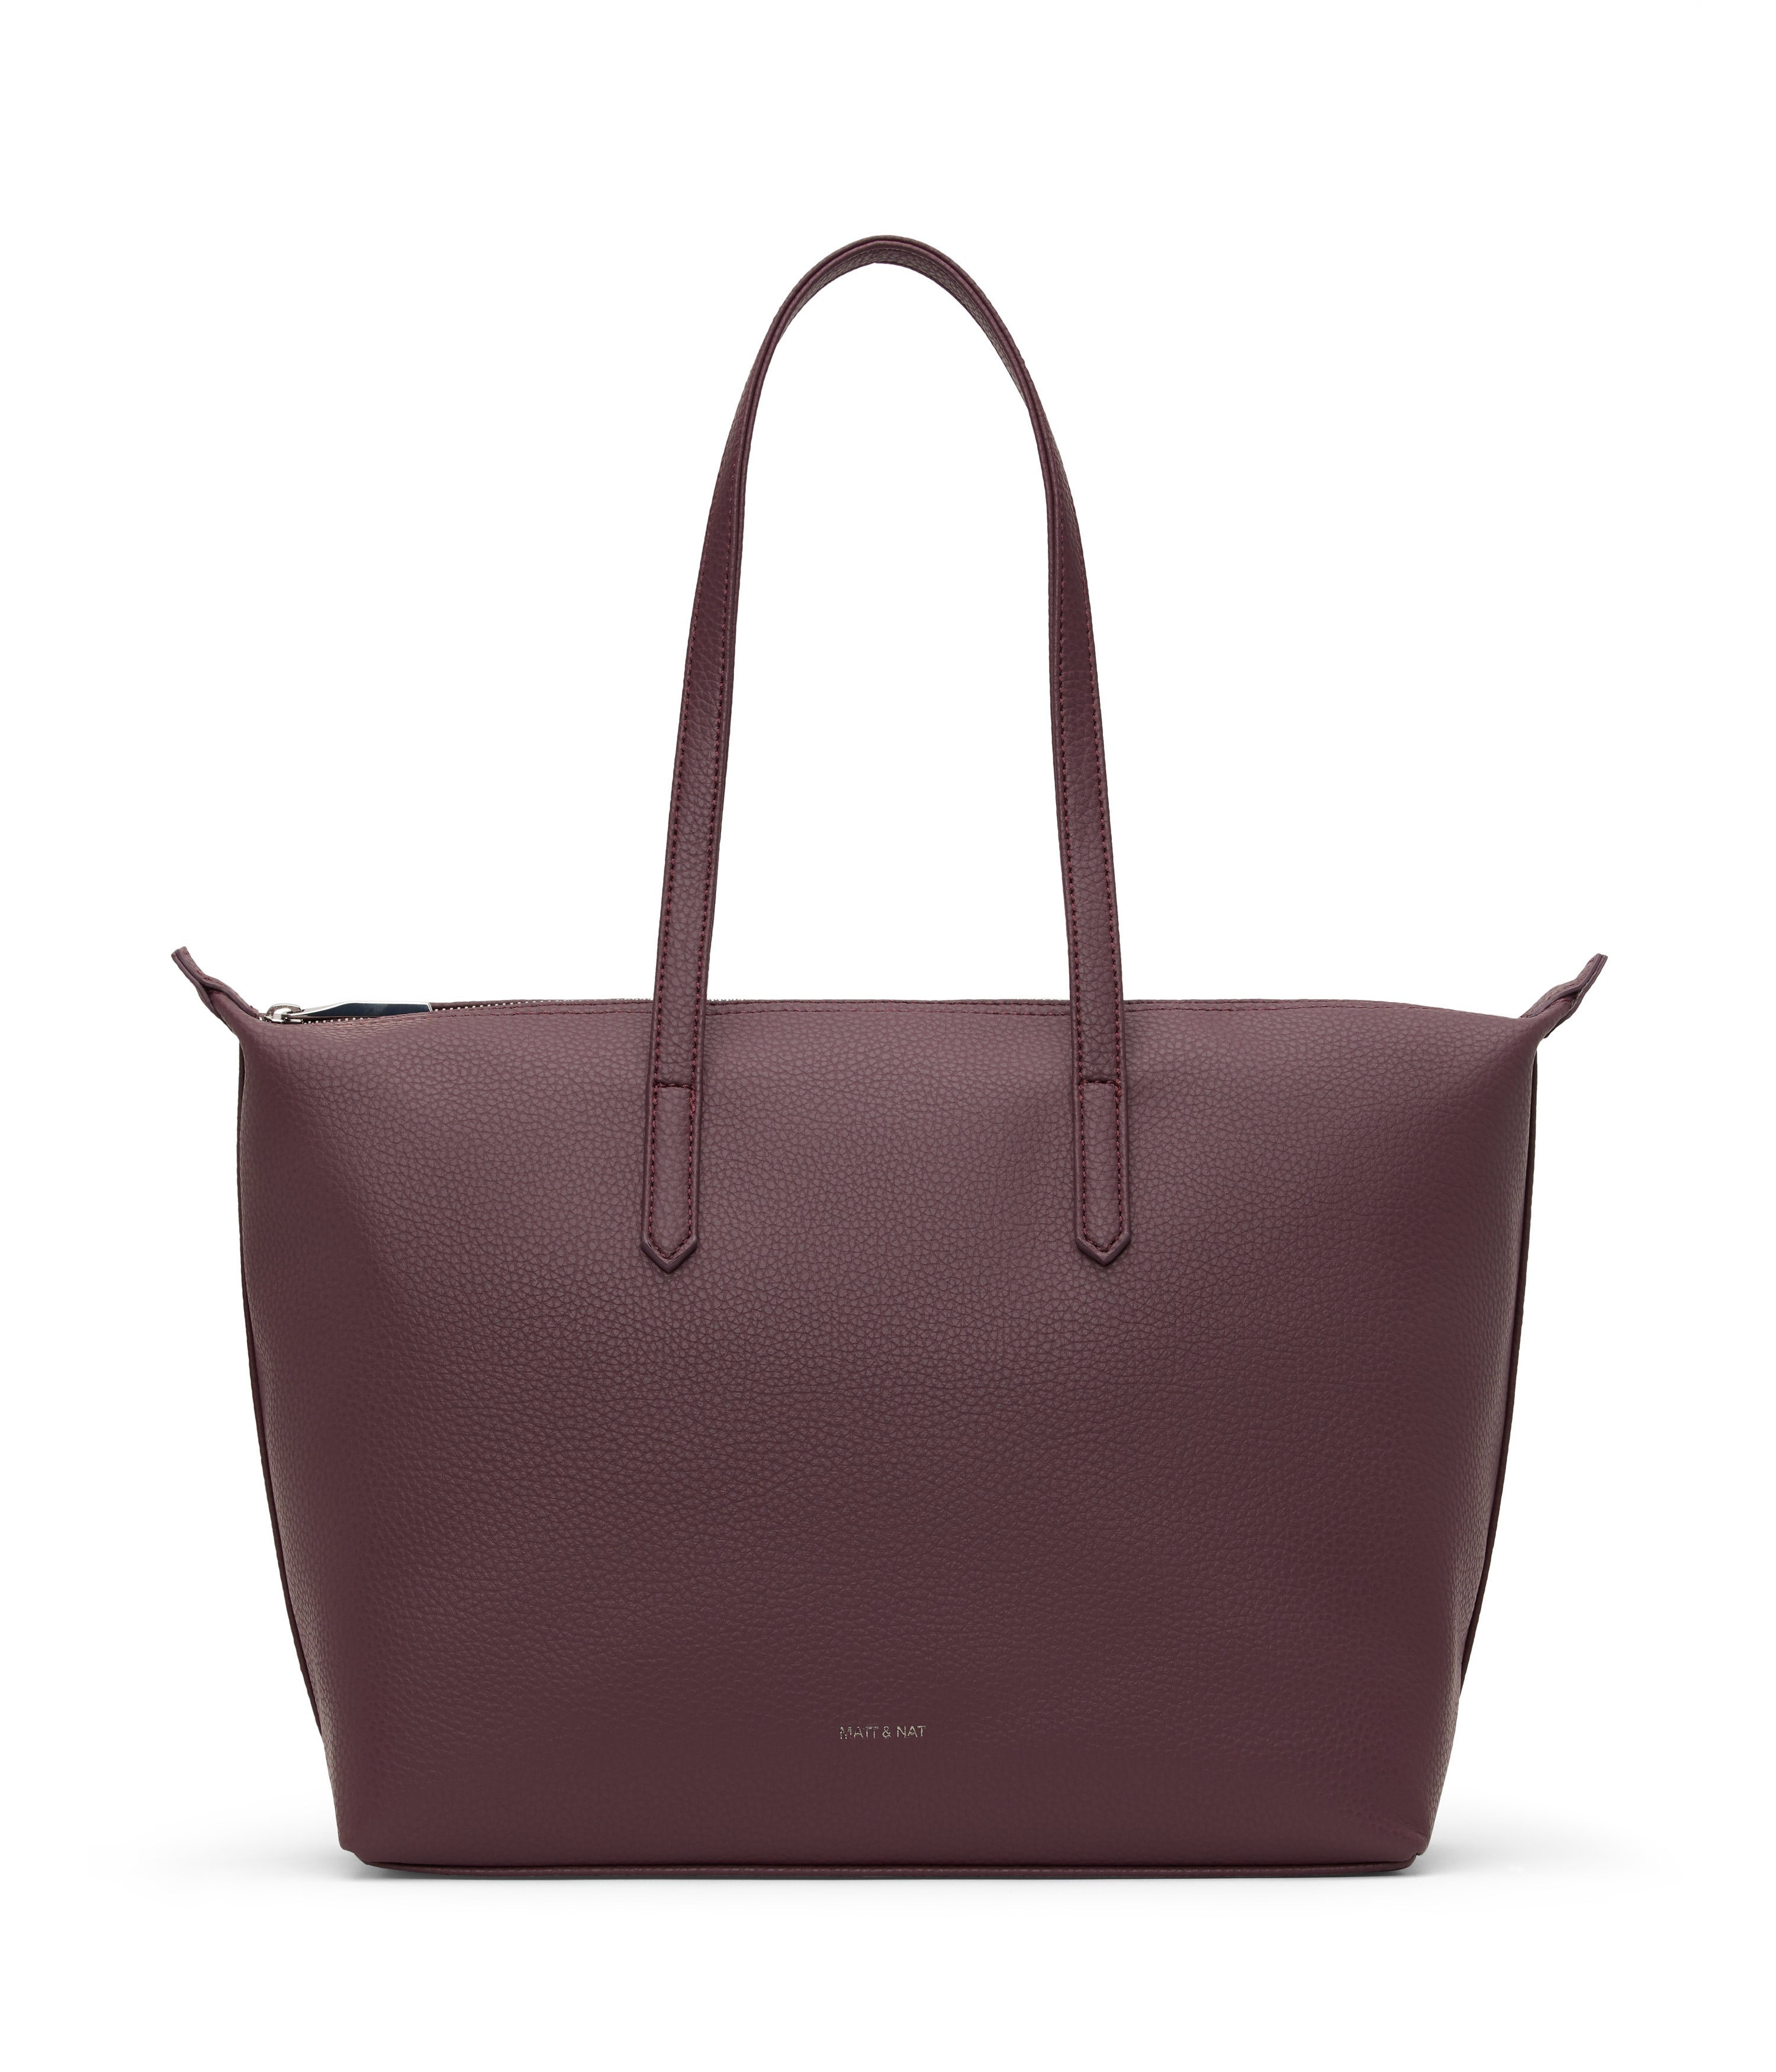 Abbi Tote Bag - Purity Collection